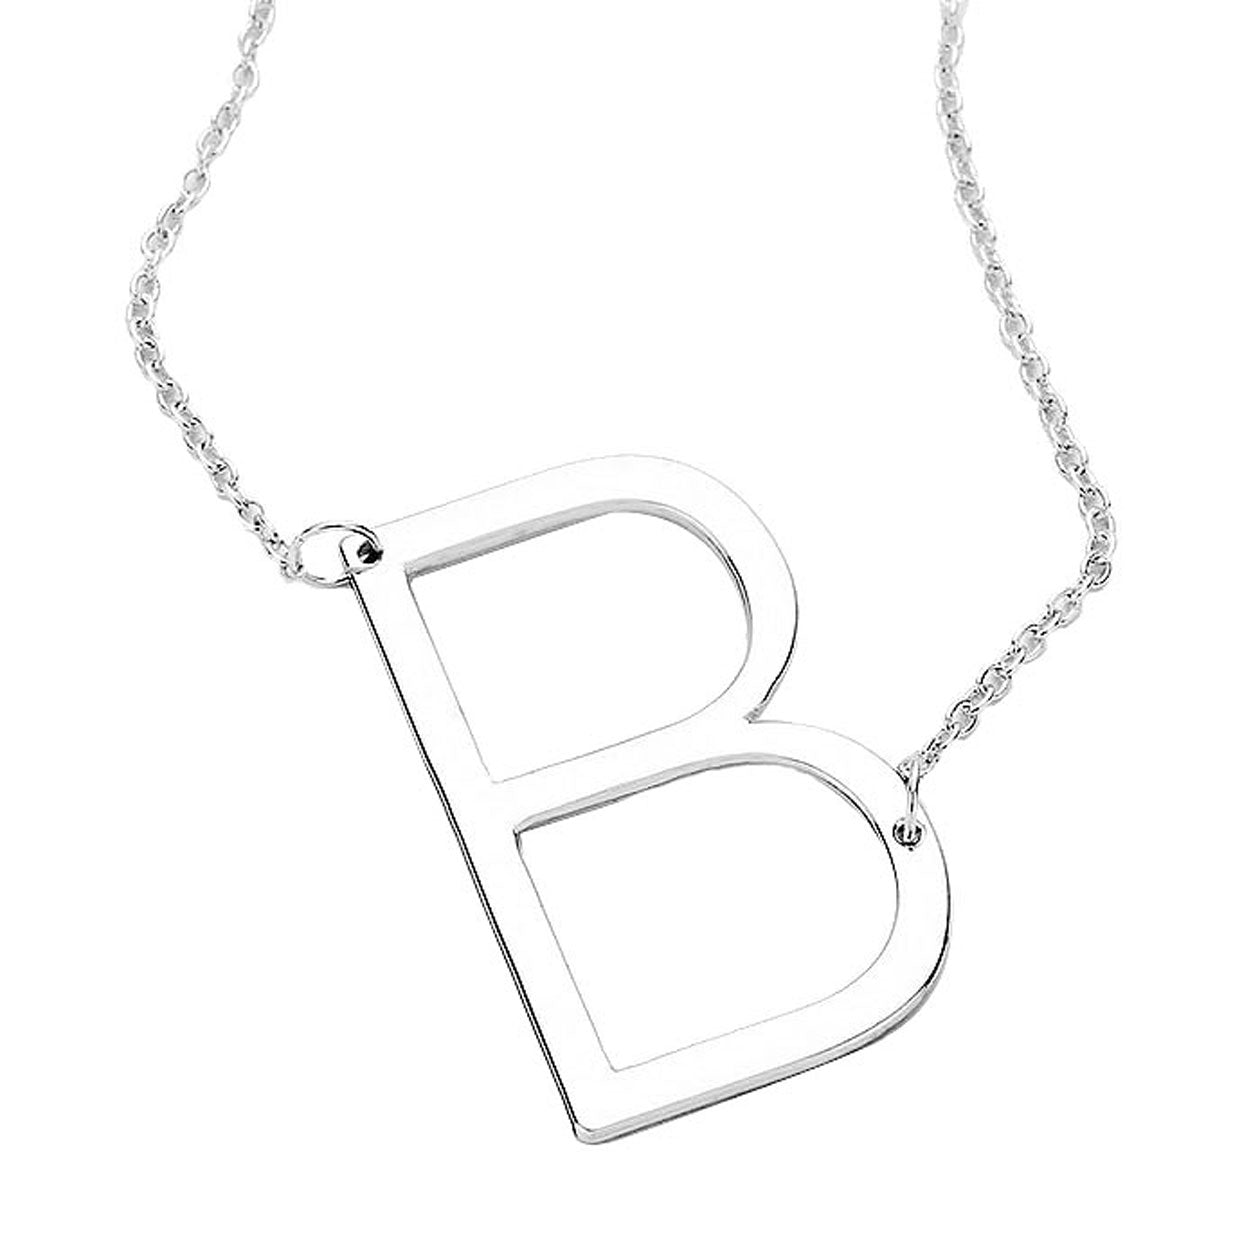 Gold B Monogram Metal Pendant Necklace. Beautifully crafted design adds a gorgeous glow to any outfit. Jewelry that fits your lifestyle! Perfect Birthday Gift, Anniversary Gift, Mother's Day Gift, Anniversary Gift, Graduation Gift, Prom Jewelry, Just Because Gift, Thank you Gift.